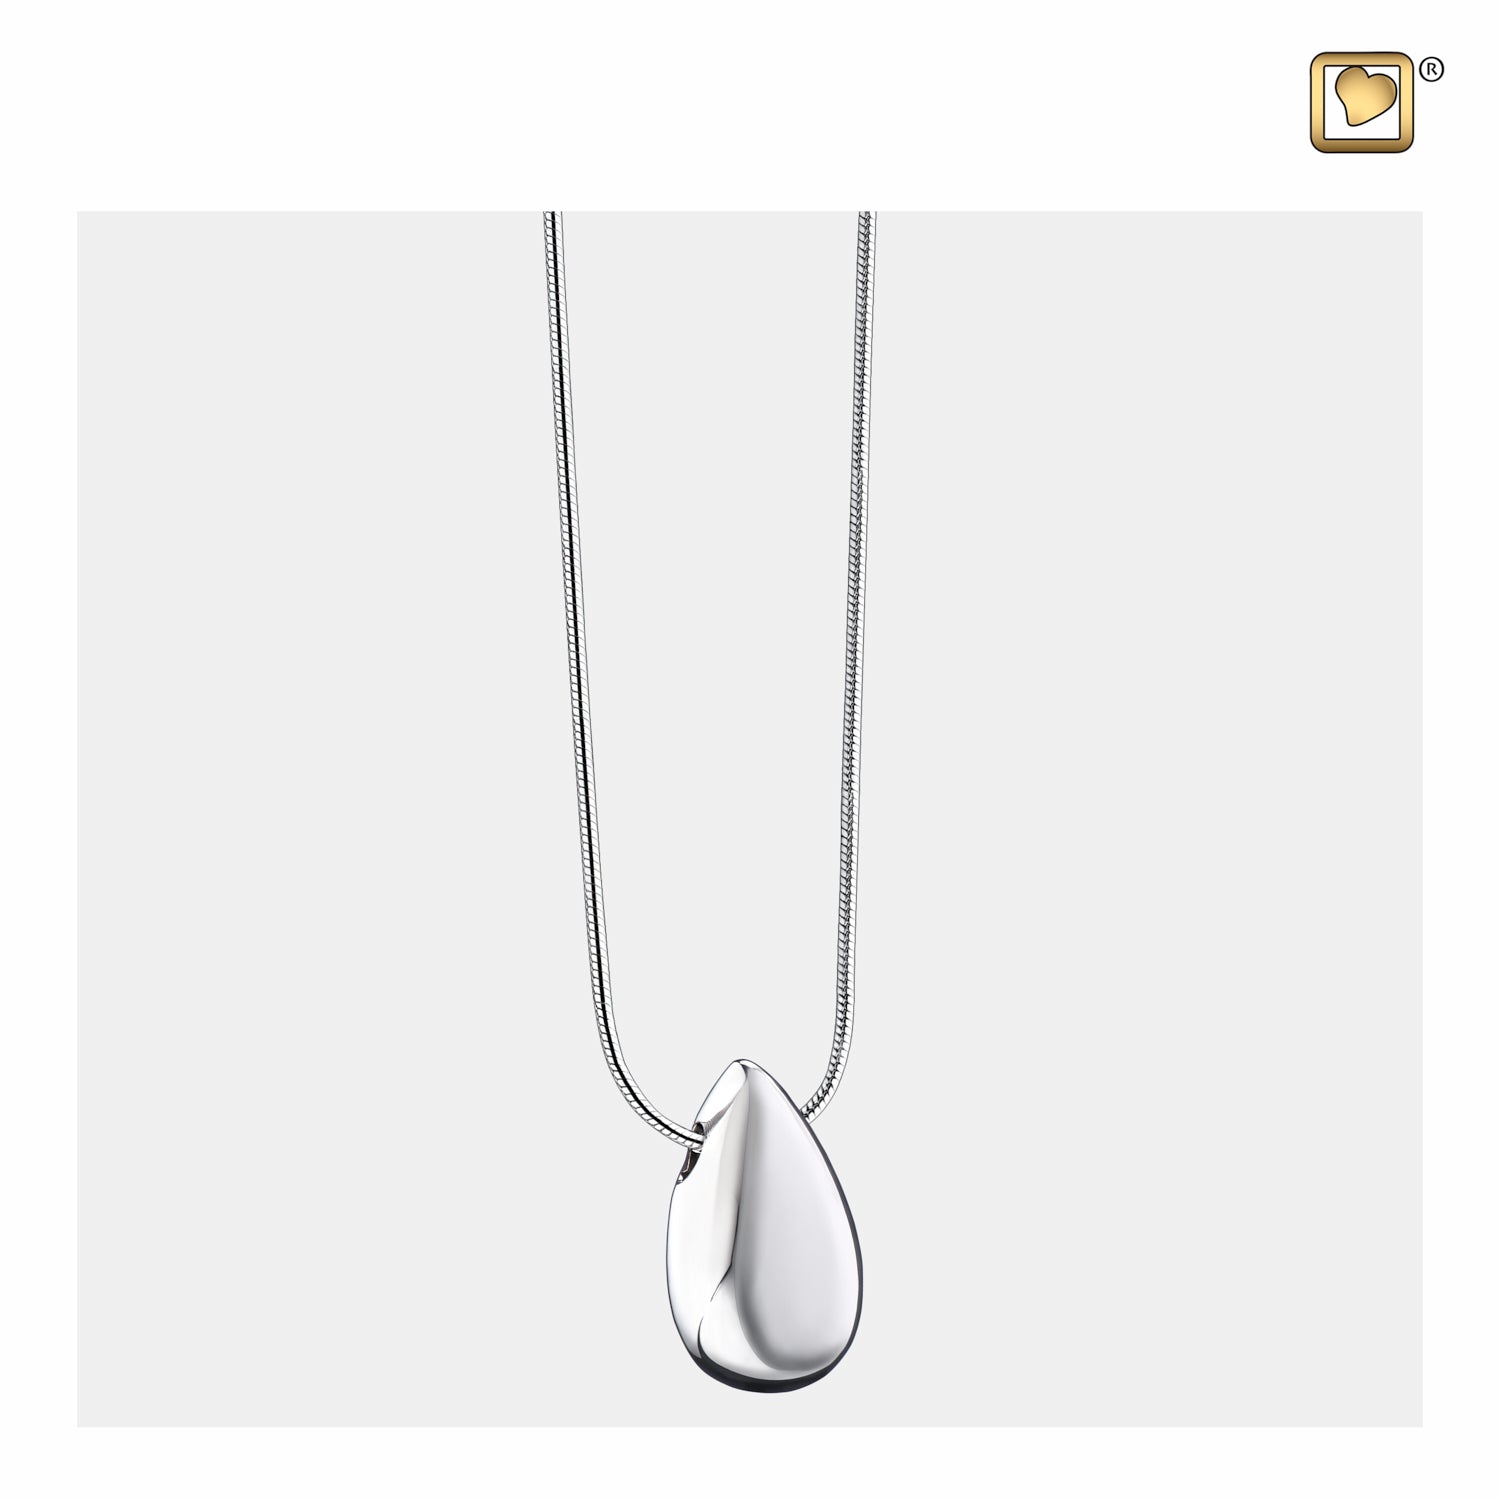 Drop Rhodium Plated Sterling Silver Cremation Pendant